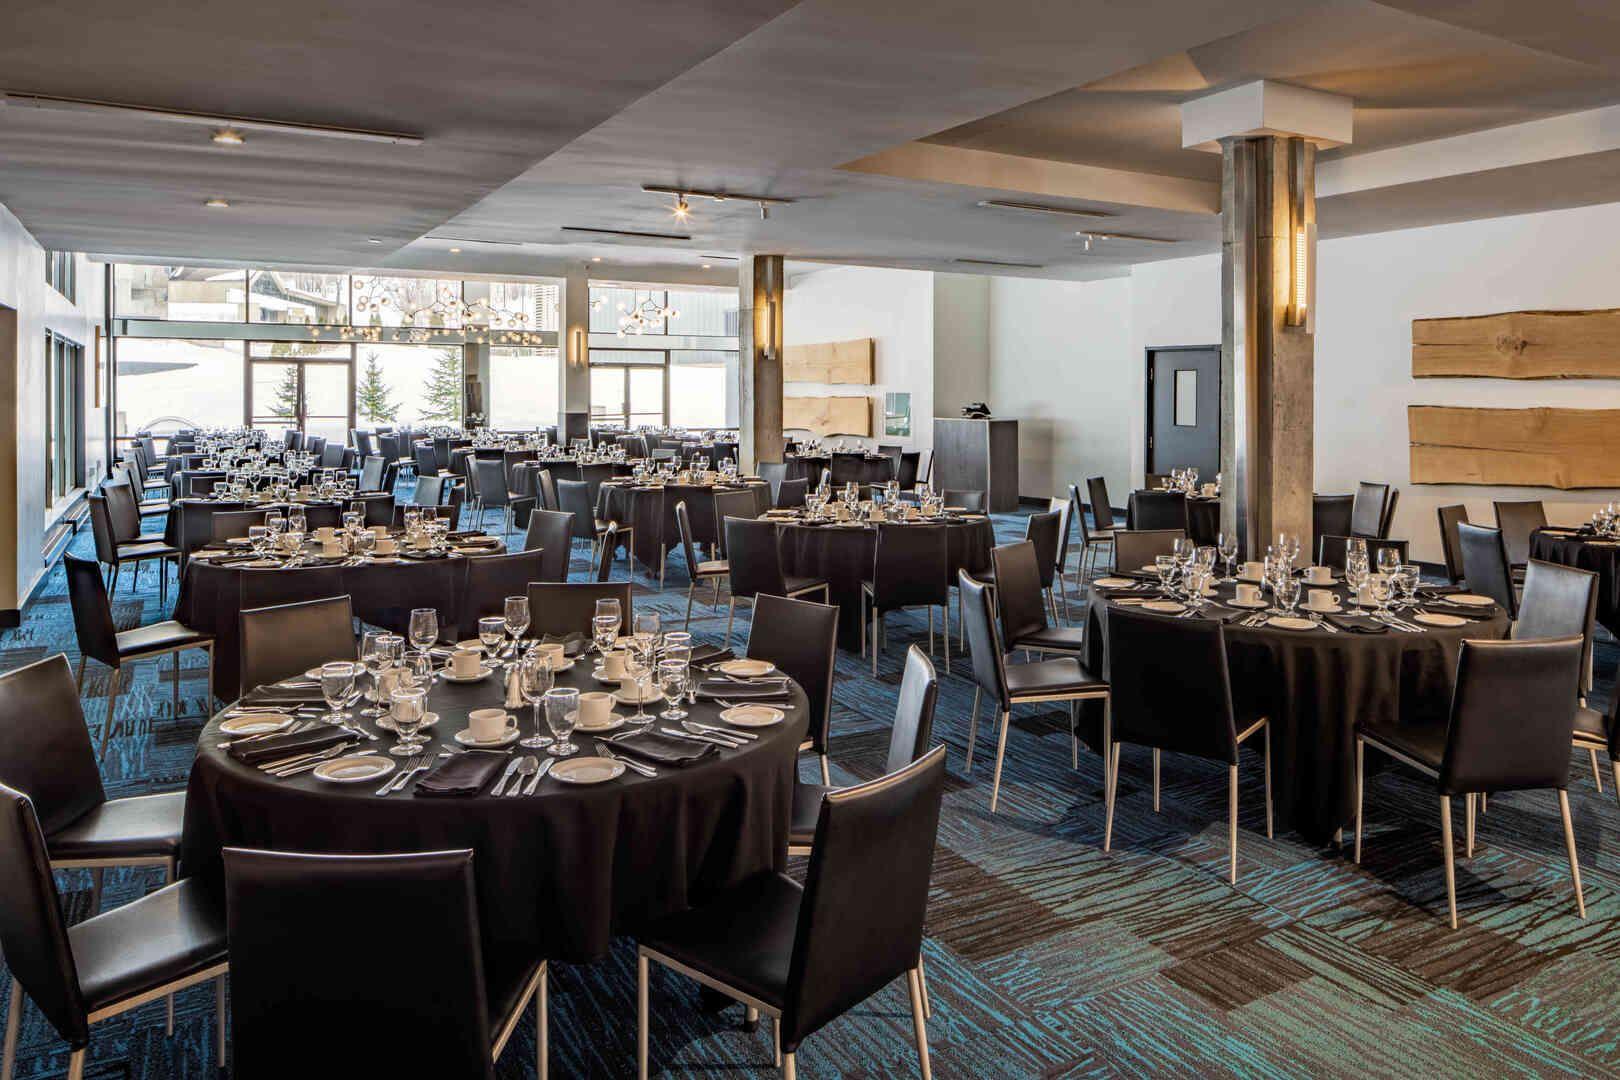 What are the advantages of renting a room for corporate events?